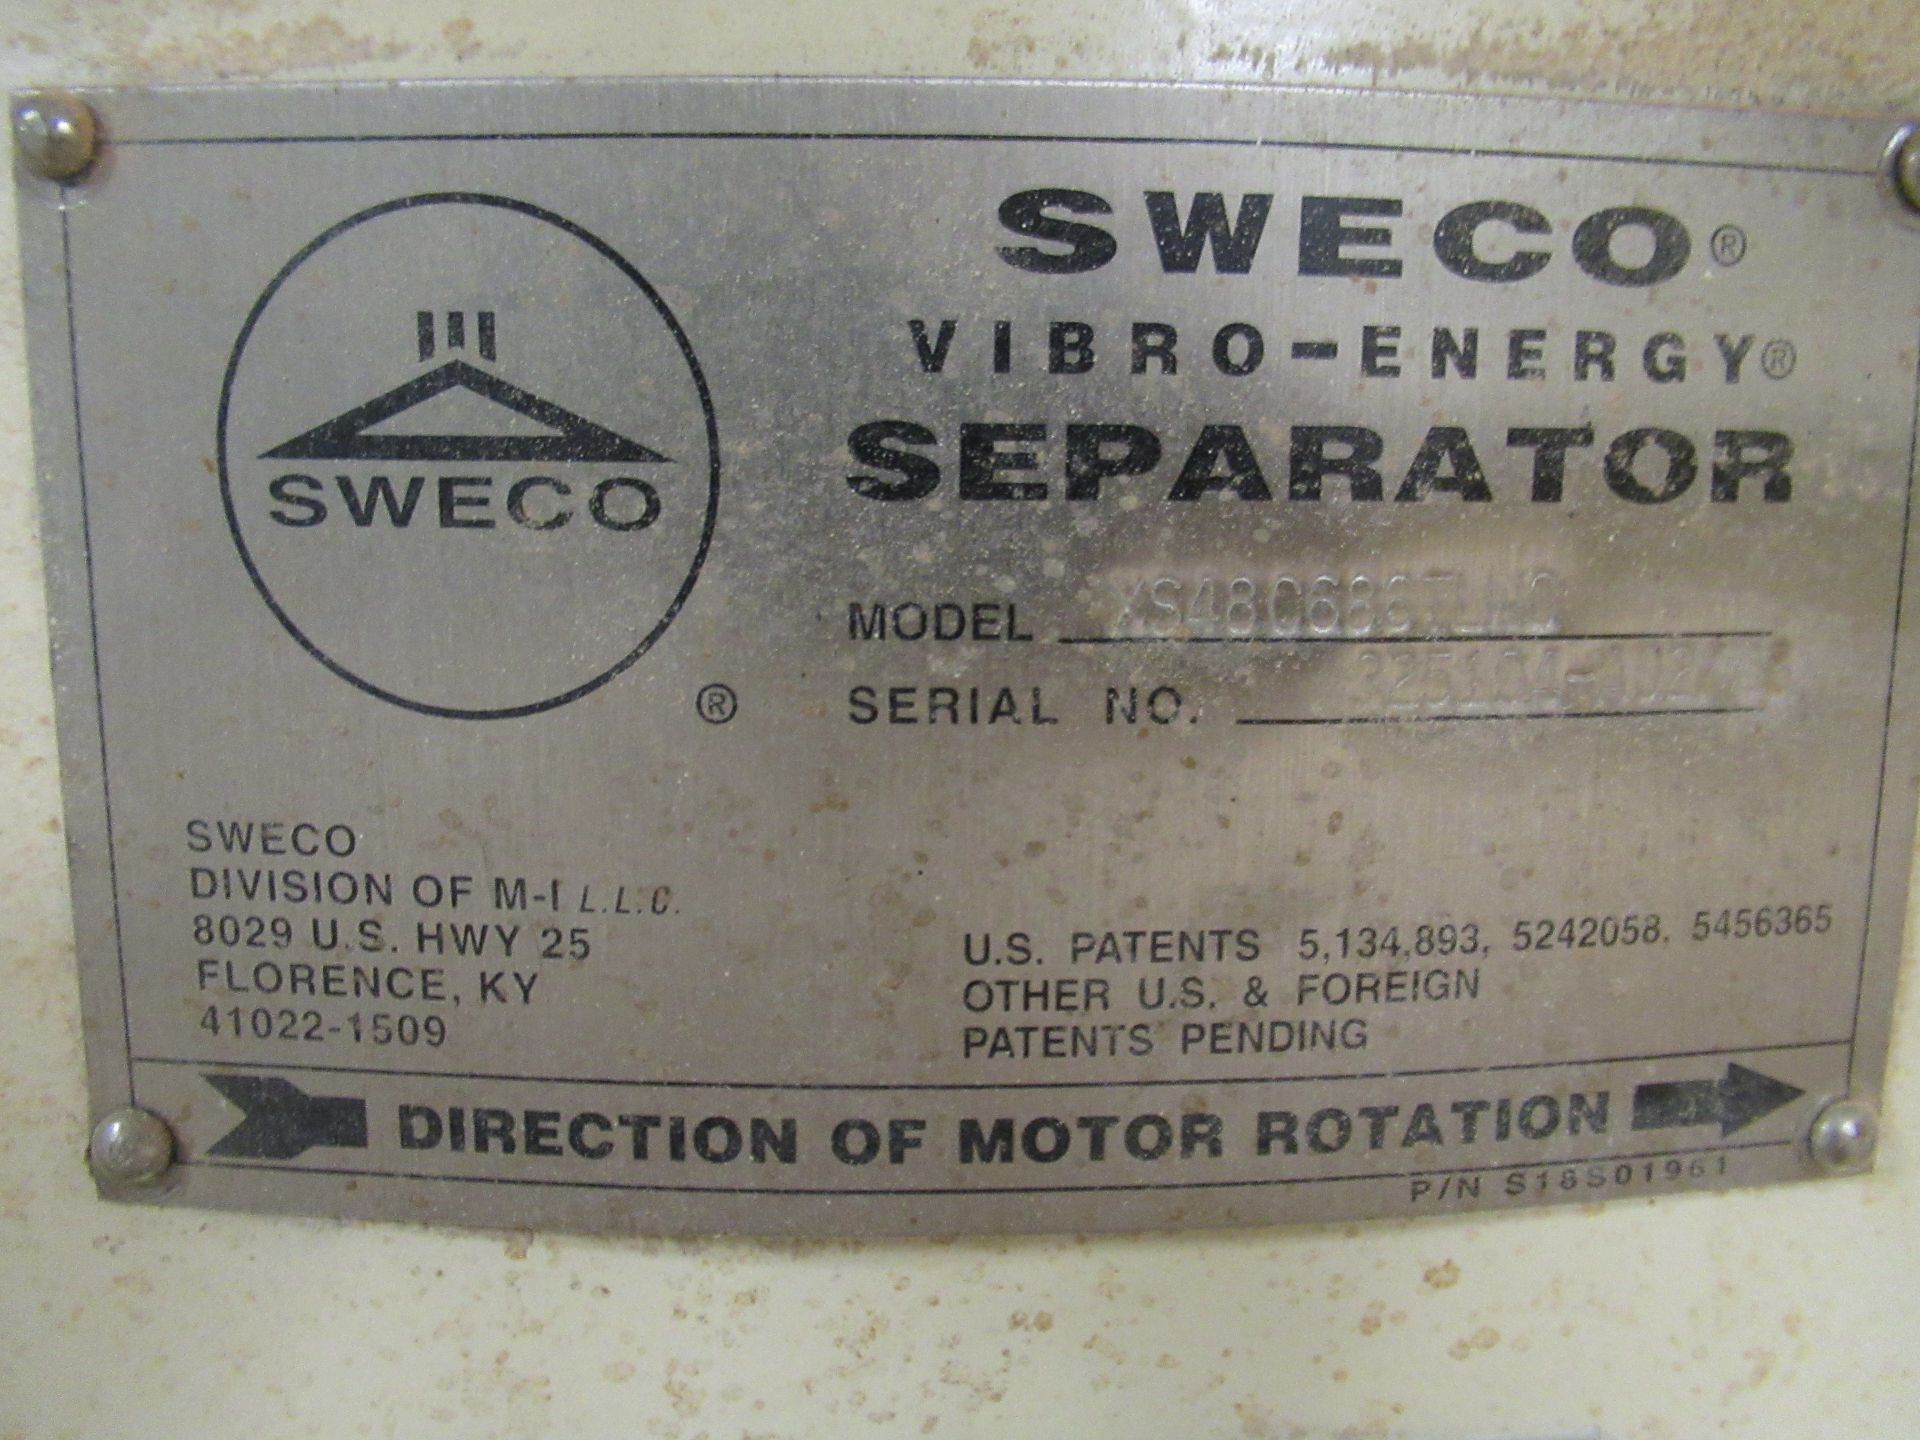 Sweco vibrator separator, mod XS480686T, s/n 325104A0206, 48" [Tower, 5th Floor] - Image 2 of 2